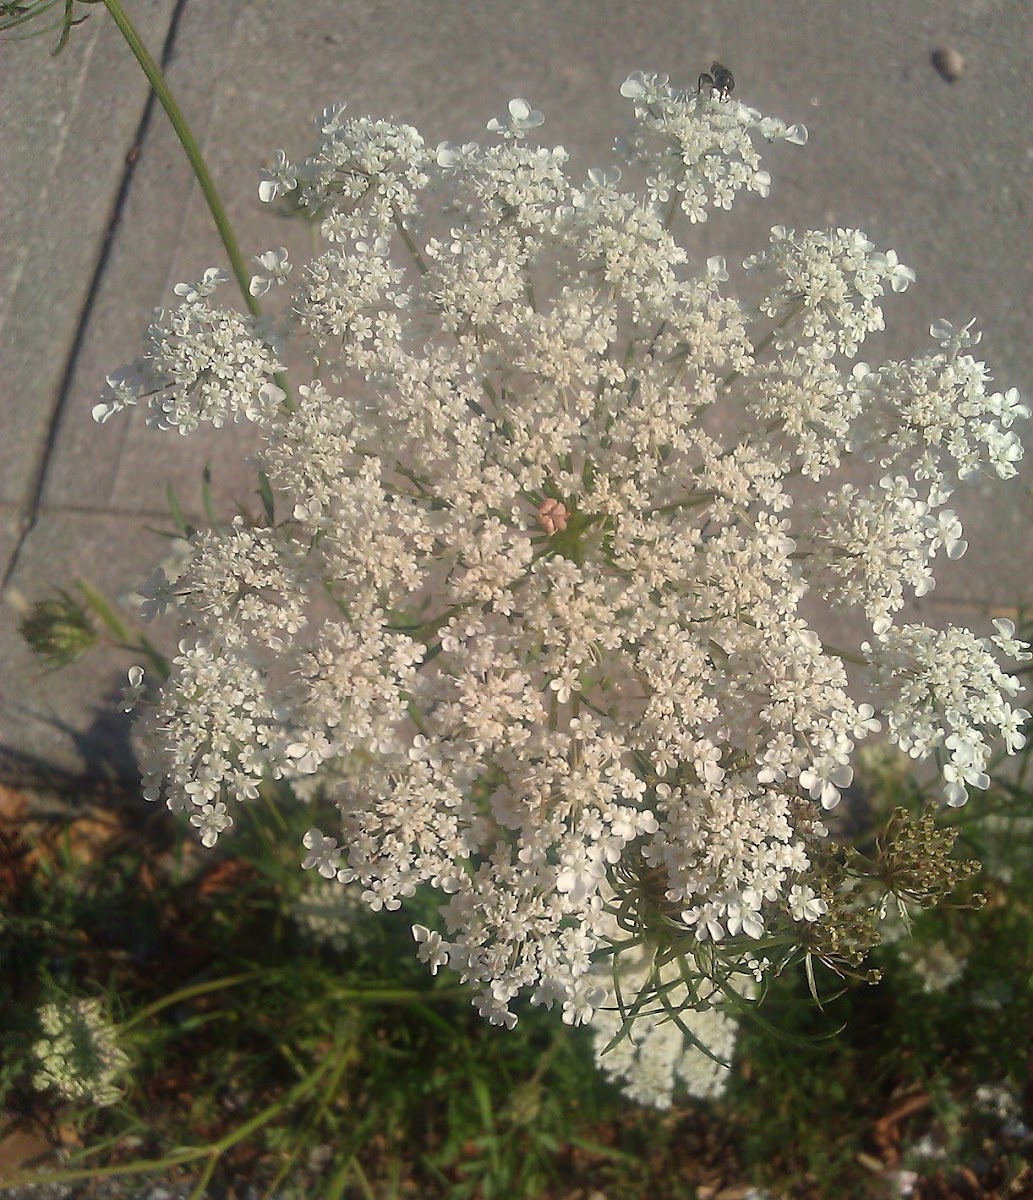 Queen Anne's Lace (Wild  Carrot)